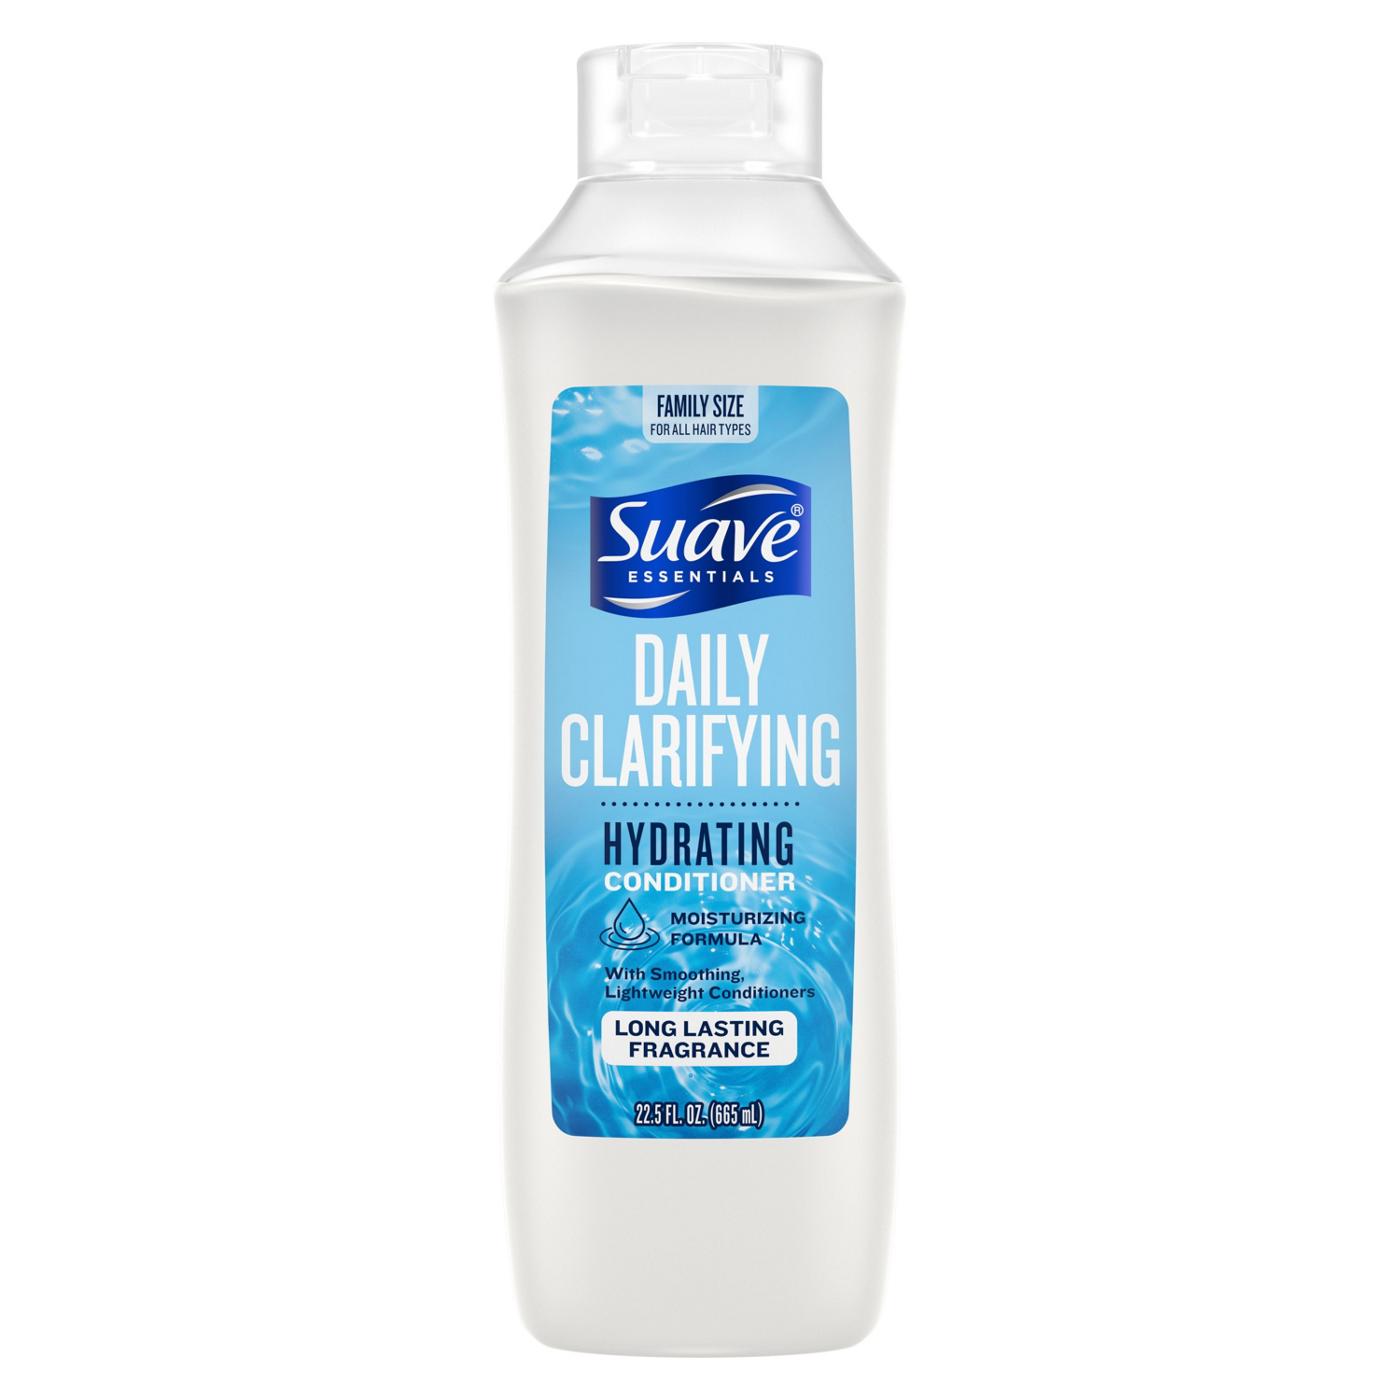 Suave Essentials Cleansing Conditioner - Daily Clarifying; image 1 of 5